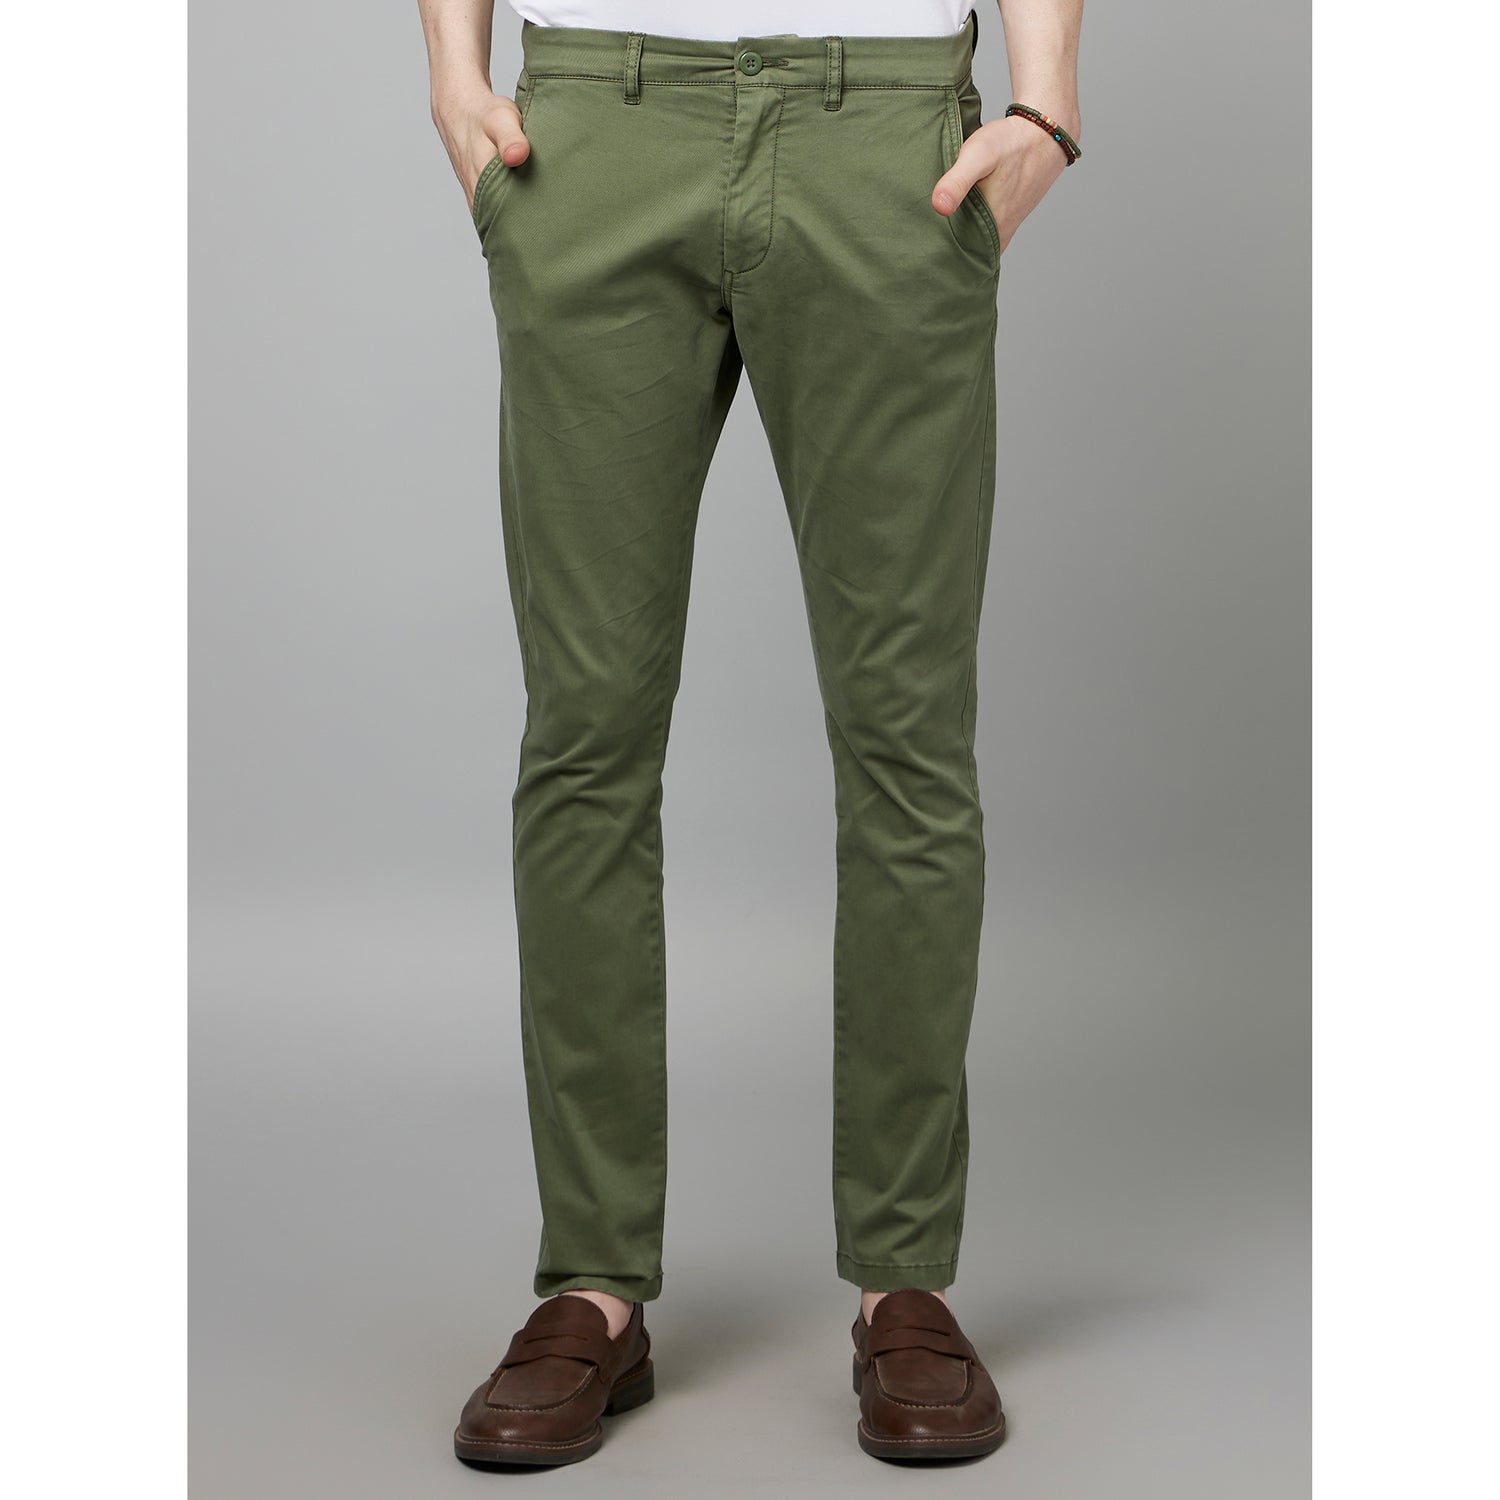 Olive Green Classic Slim Fit Cotton Trousers (FOOVER)